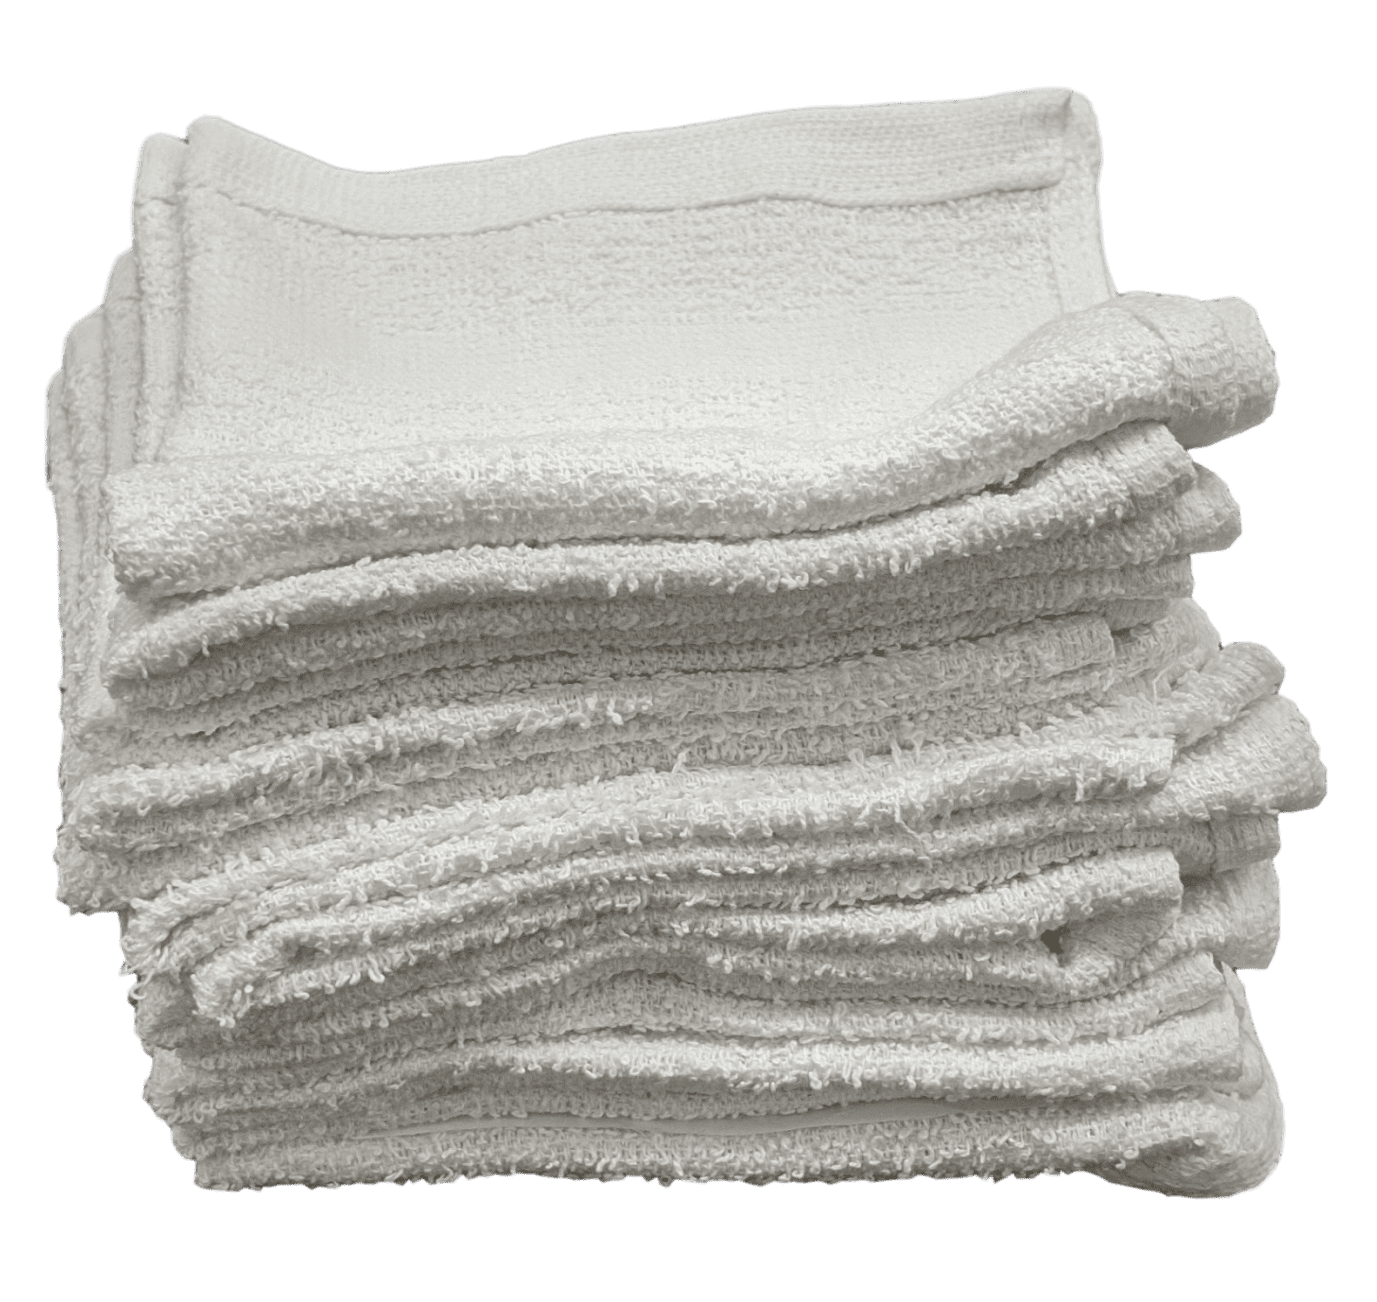 White Cotton Rags Ideal For Staining. Prevents dripping and blotching